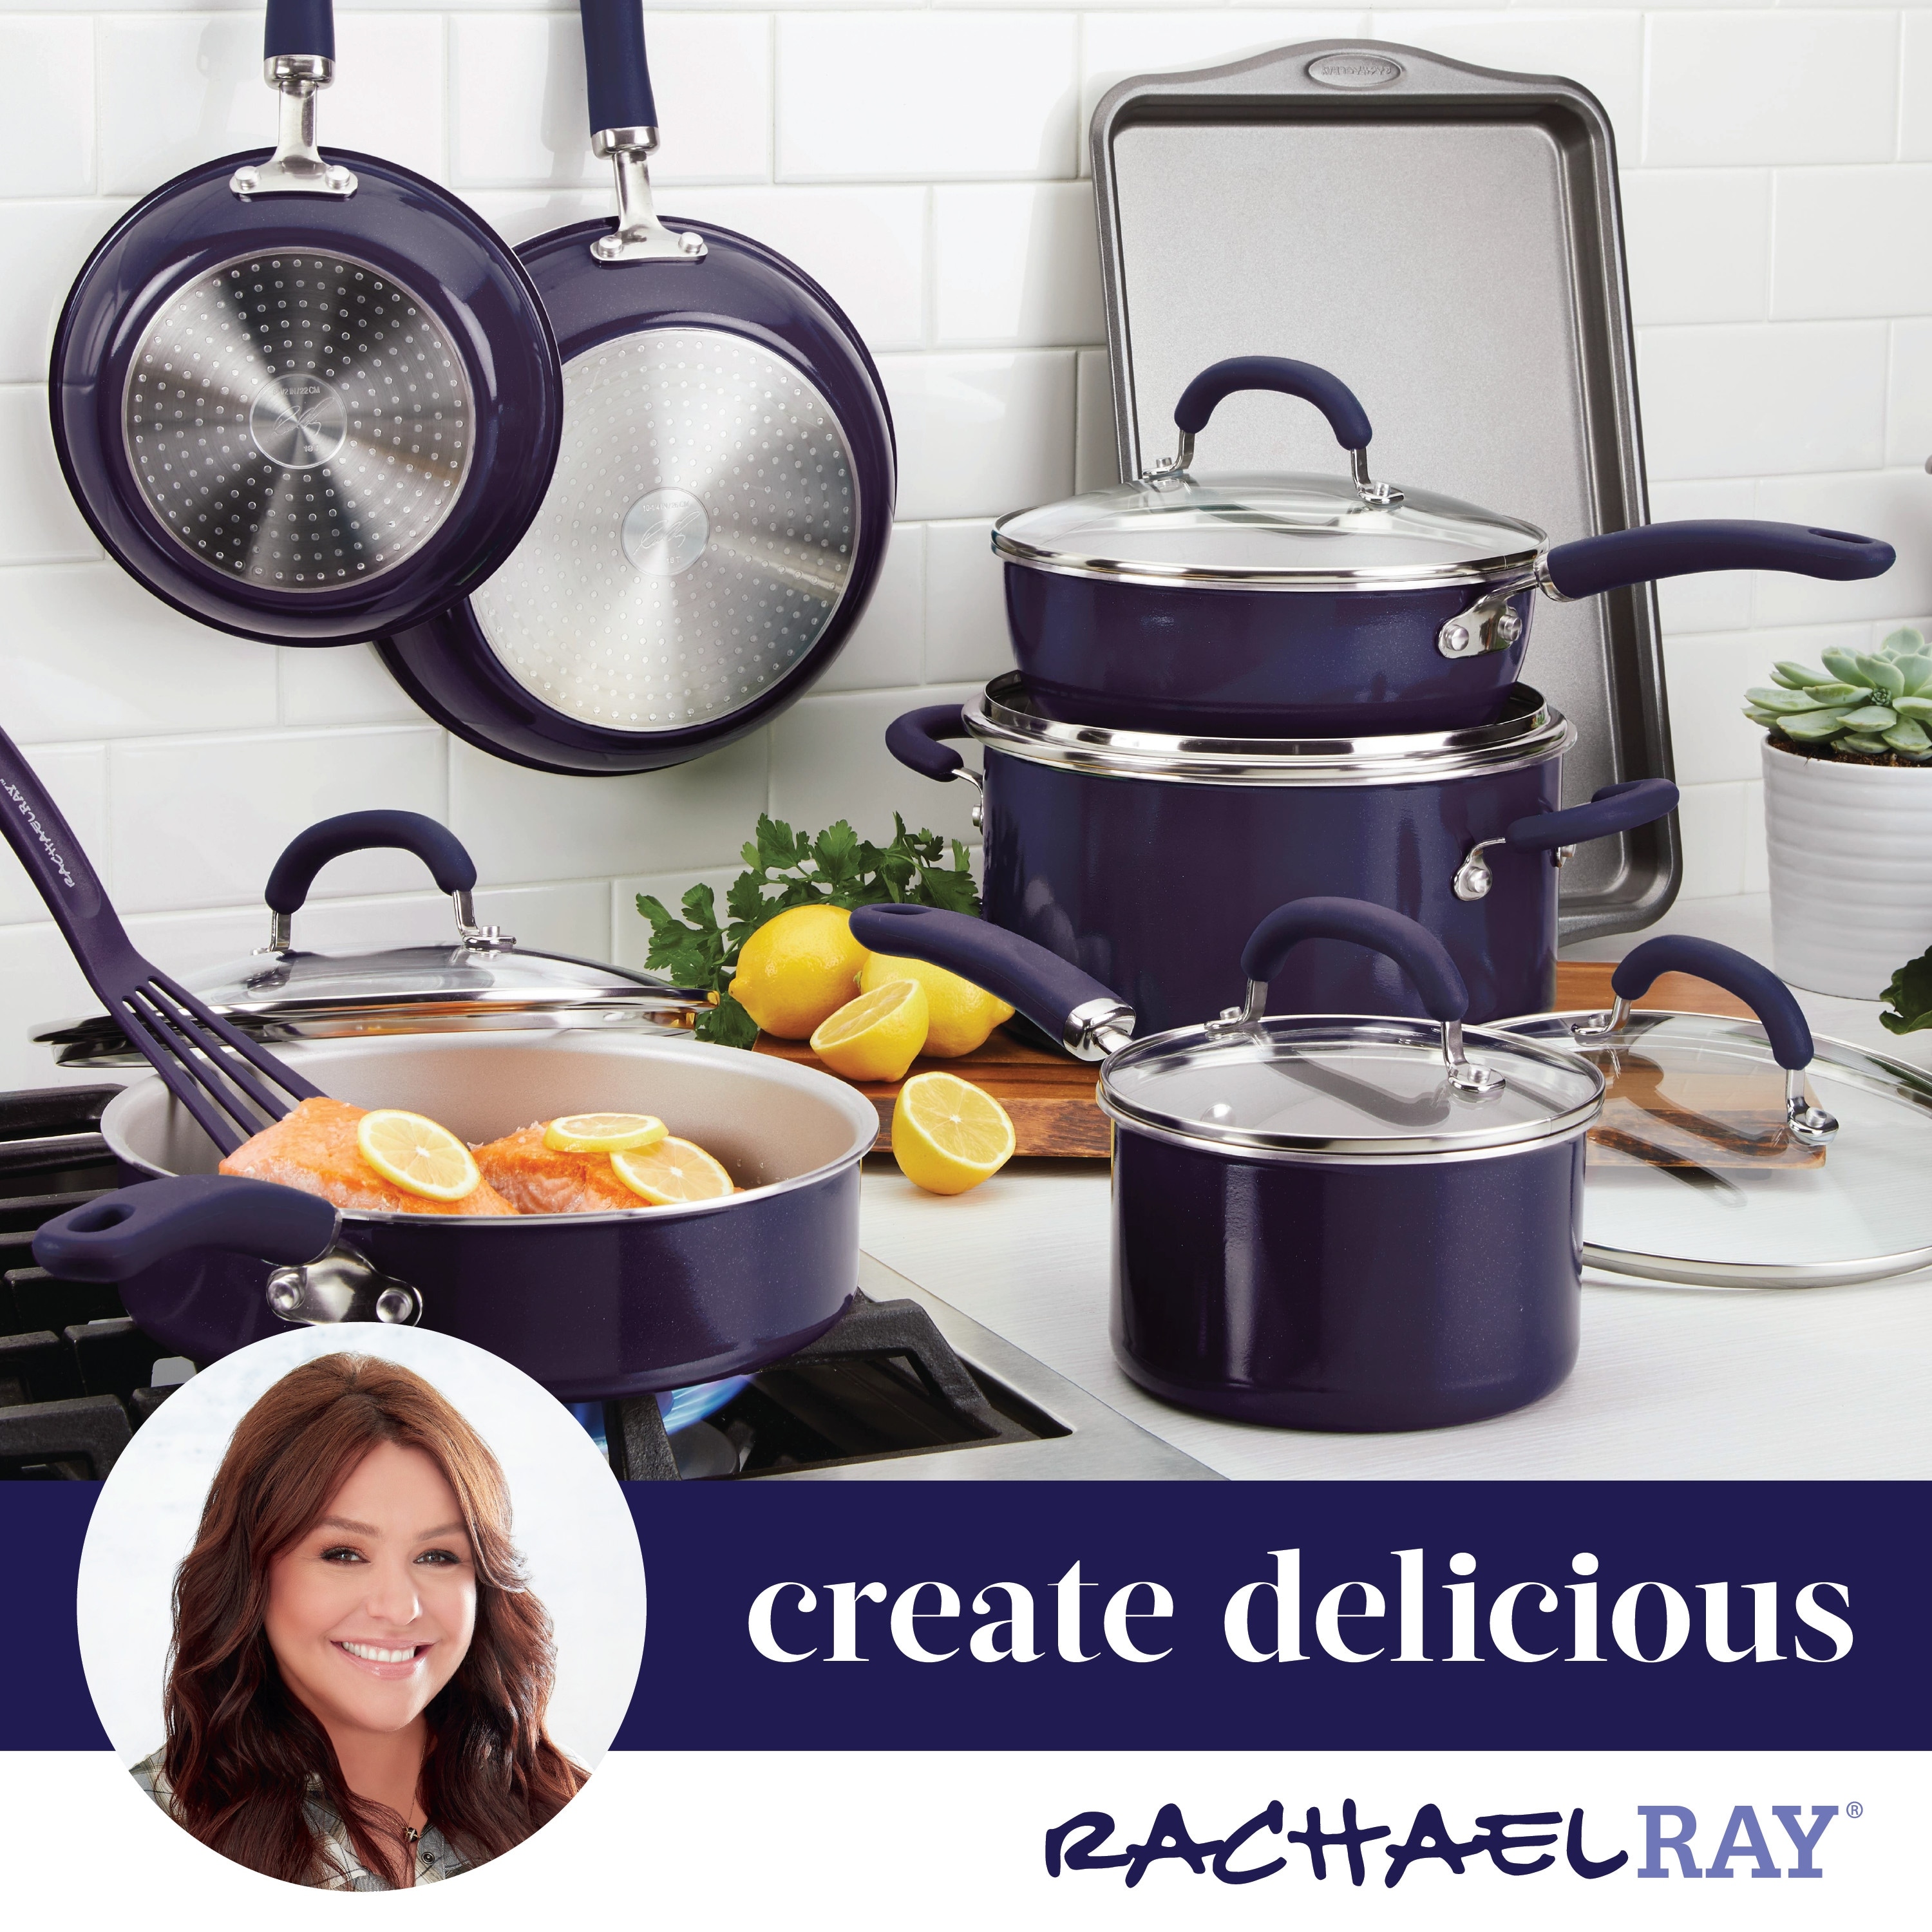 https://ak1.ostkcdn.com/images/products/is/images/direct/7fd2e5f4082a83043c697a219cbdfda879897379/Rachael-Ray-Create-Delicious-Aluminum-Nonstick-Cookware-Induction-Pots-and-Pans-Set%2C-13-Piece%2C-Red-Shimmer.jpg